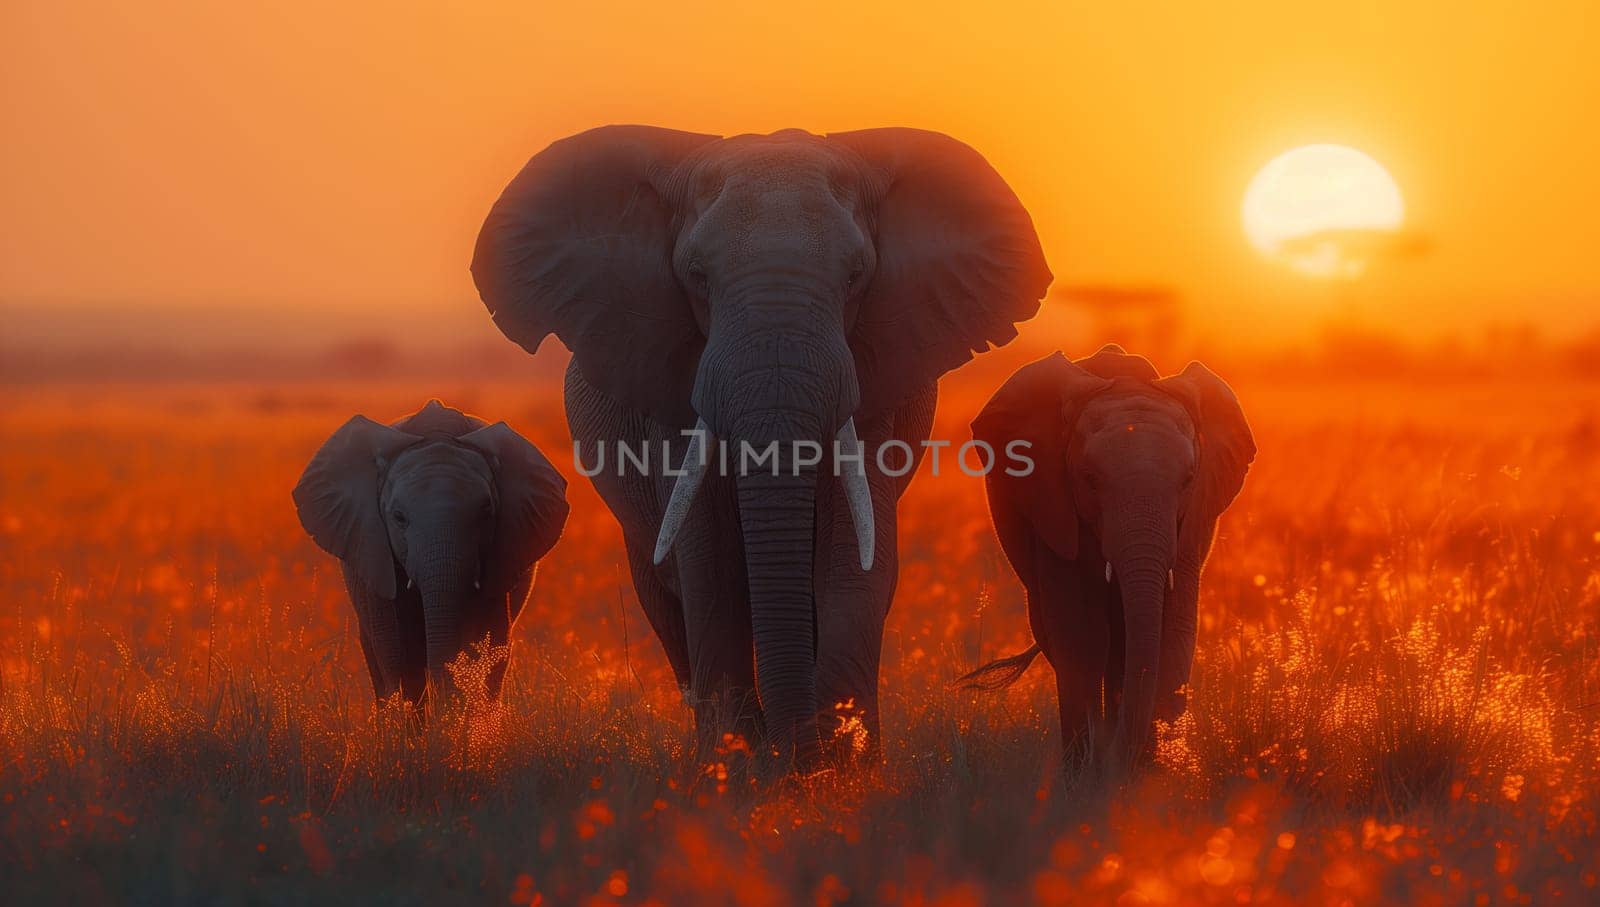 Three elephants grazing in fawncolored grassland under an orange sky at sunset by richwolf